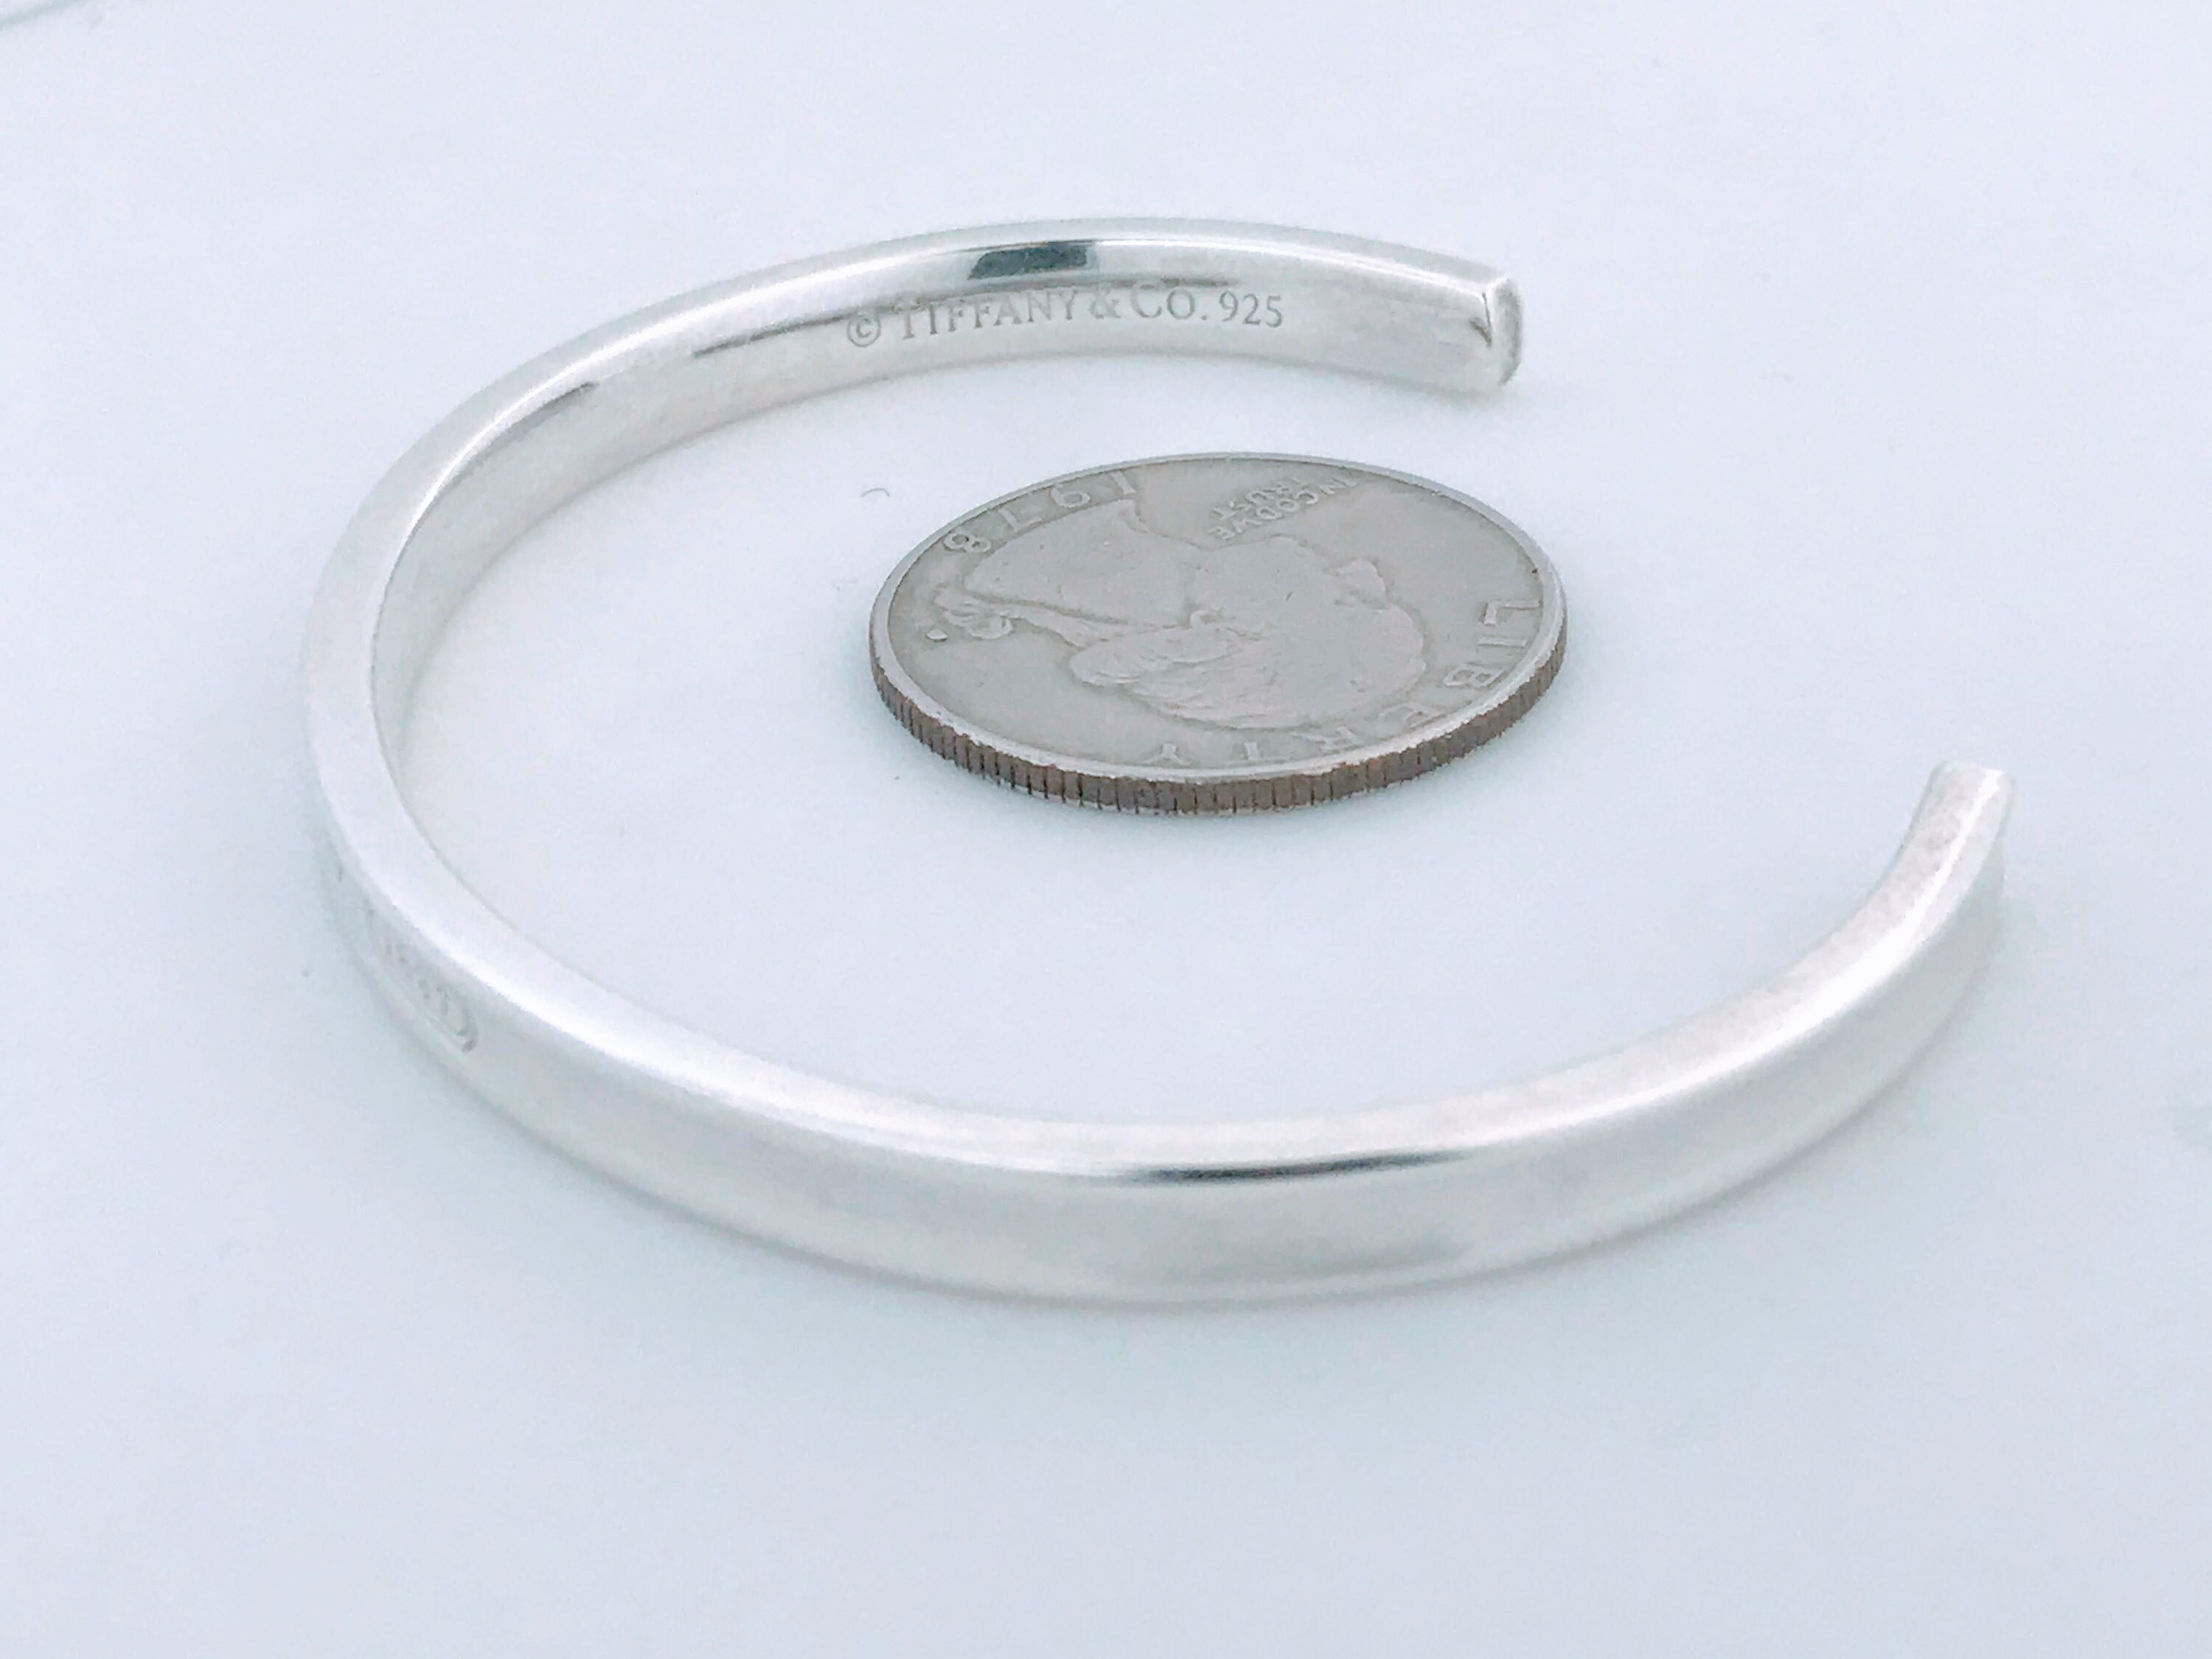 Authentic Tiffany Co. 1837 Sterling Silver 925 Cuff Bracelet -  Israel